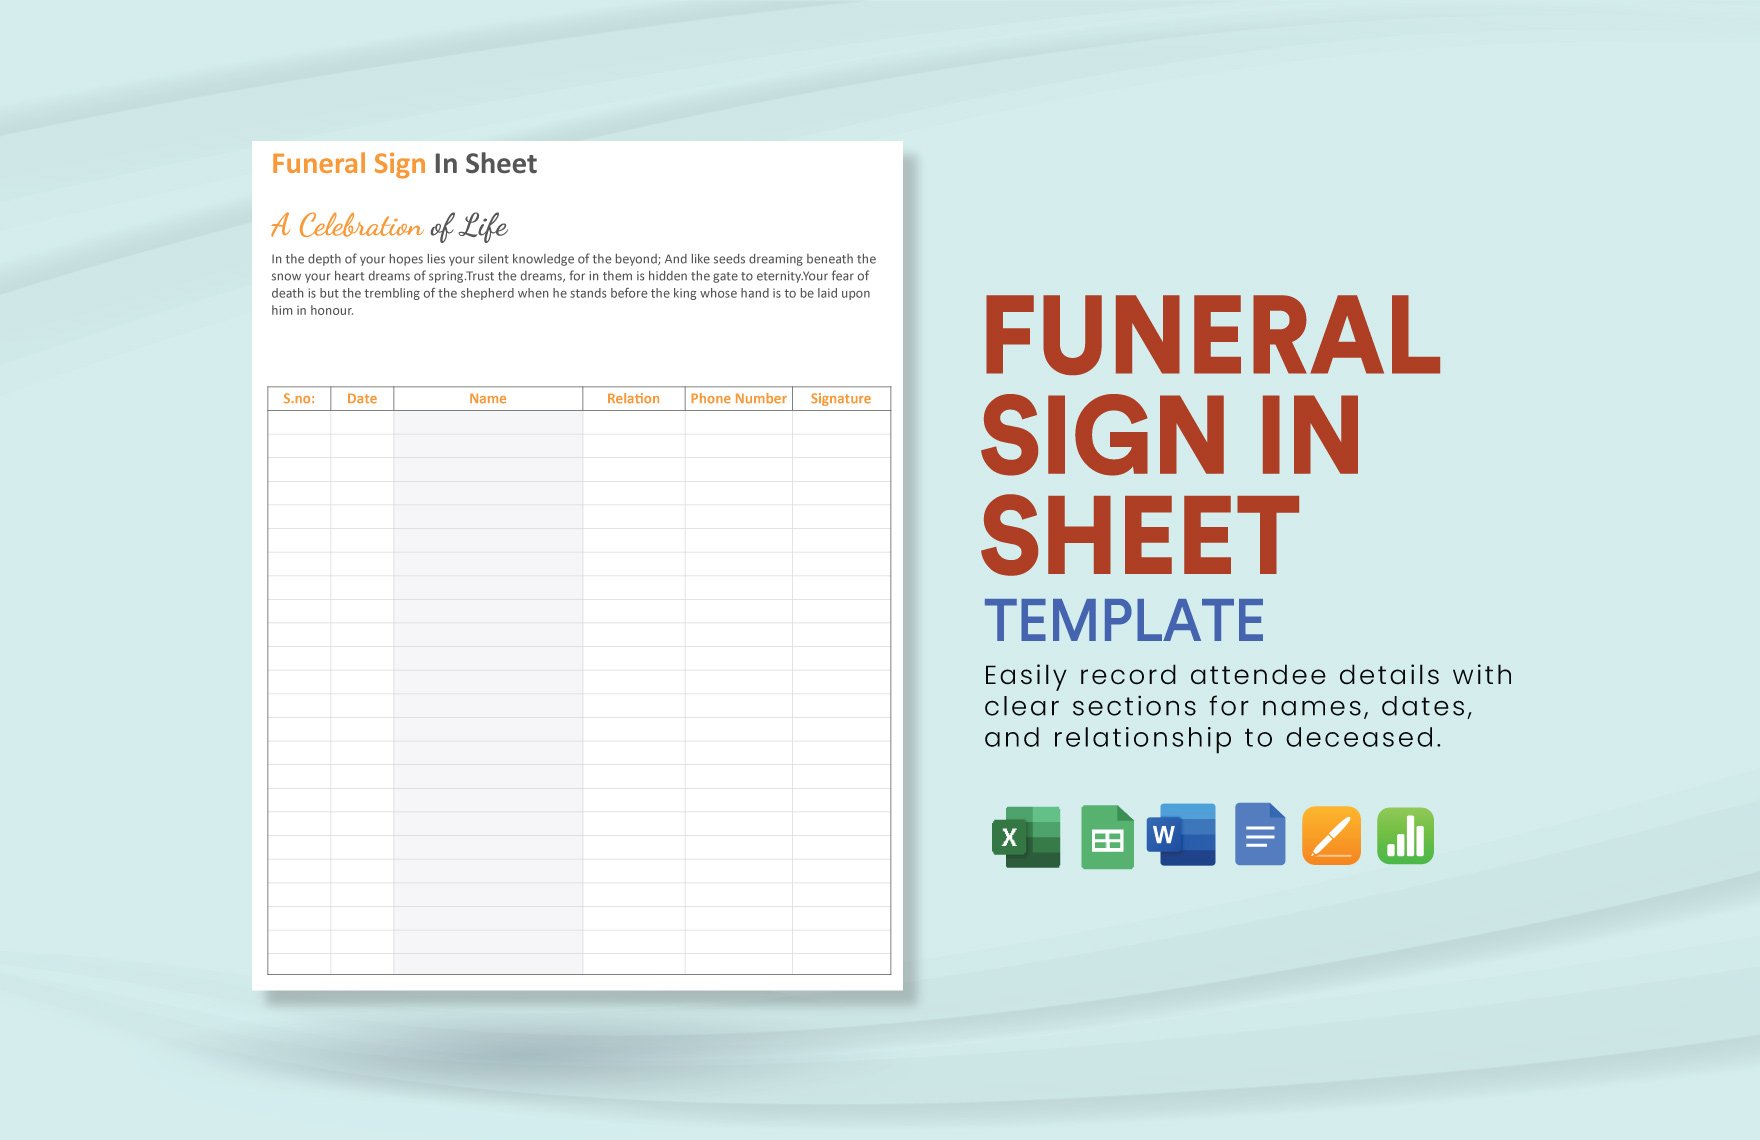 Funeral Sign in Sheet Template in Word, Google Docs, Excel, Google Sheets, Apple Pages, Apple Numbers